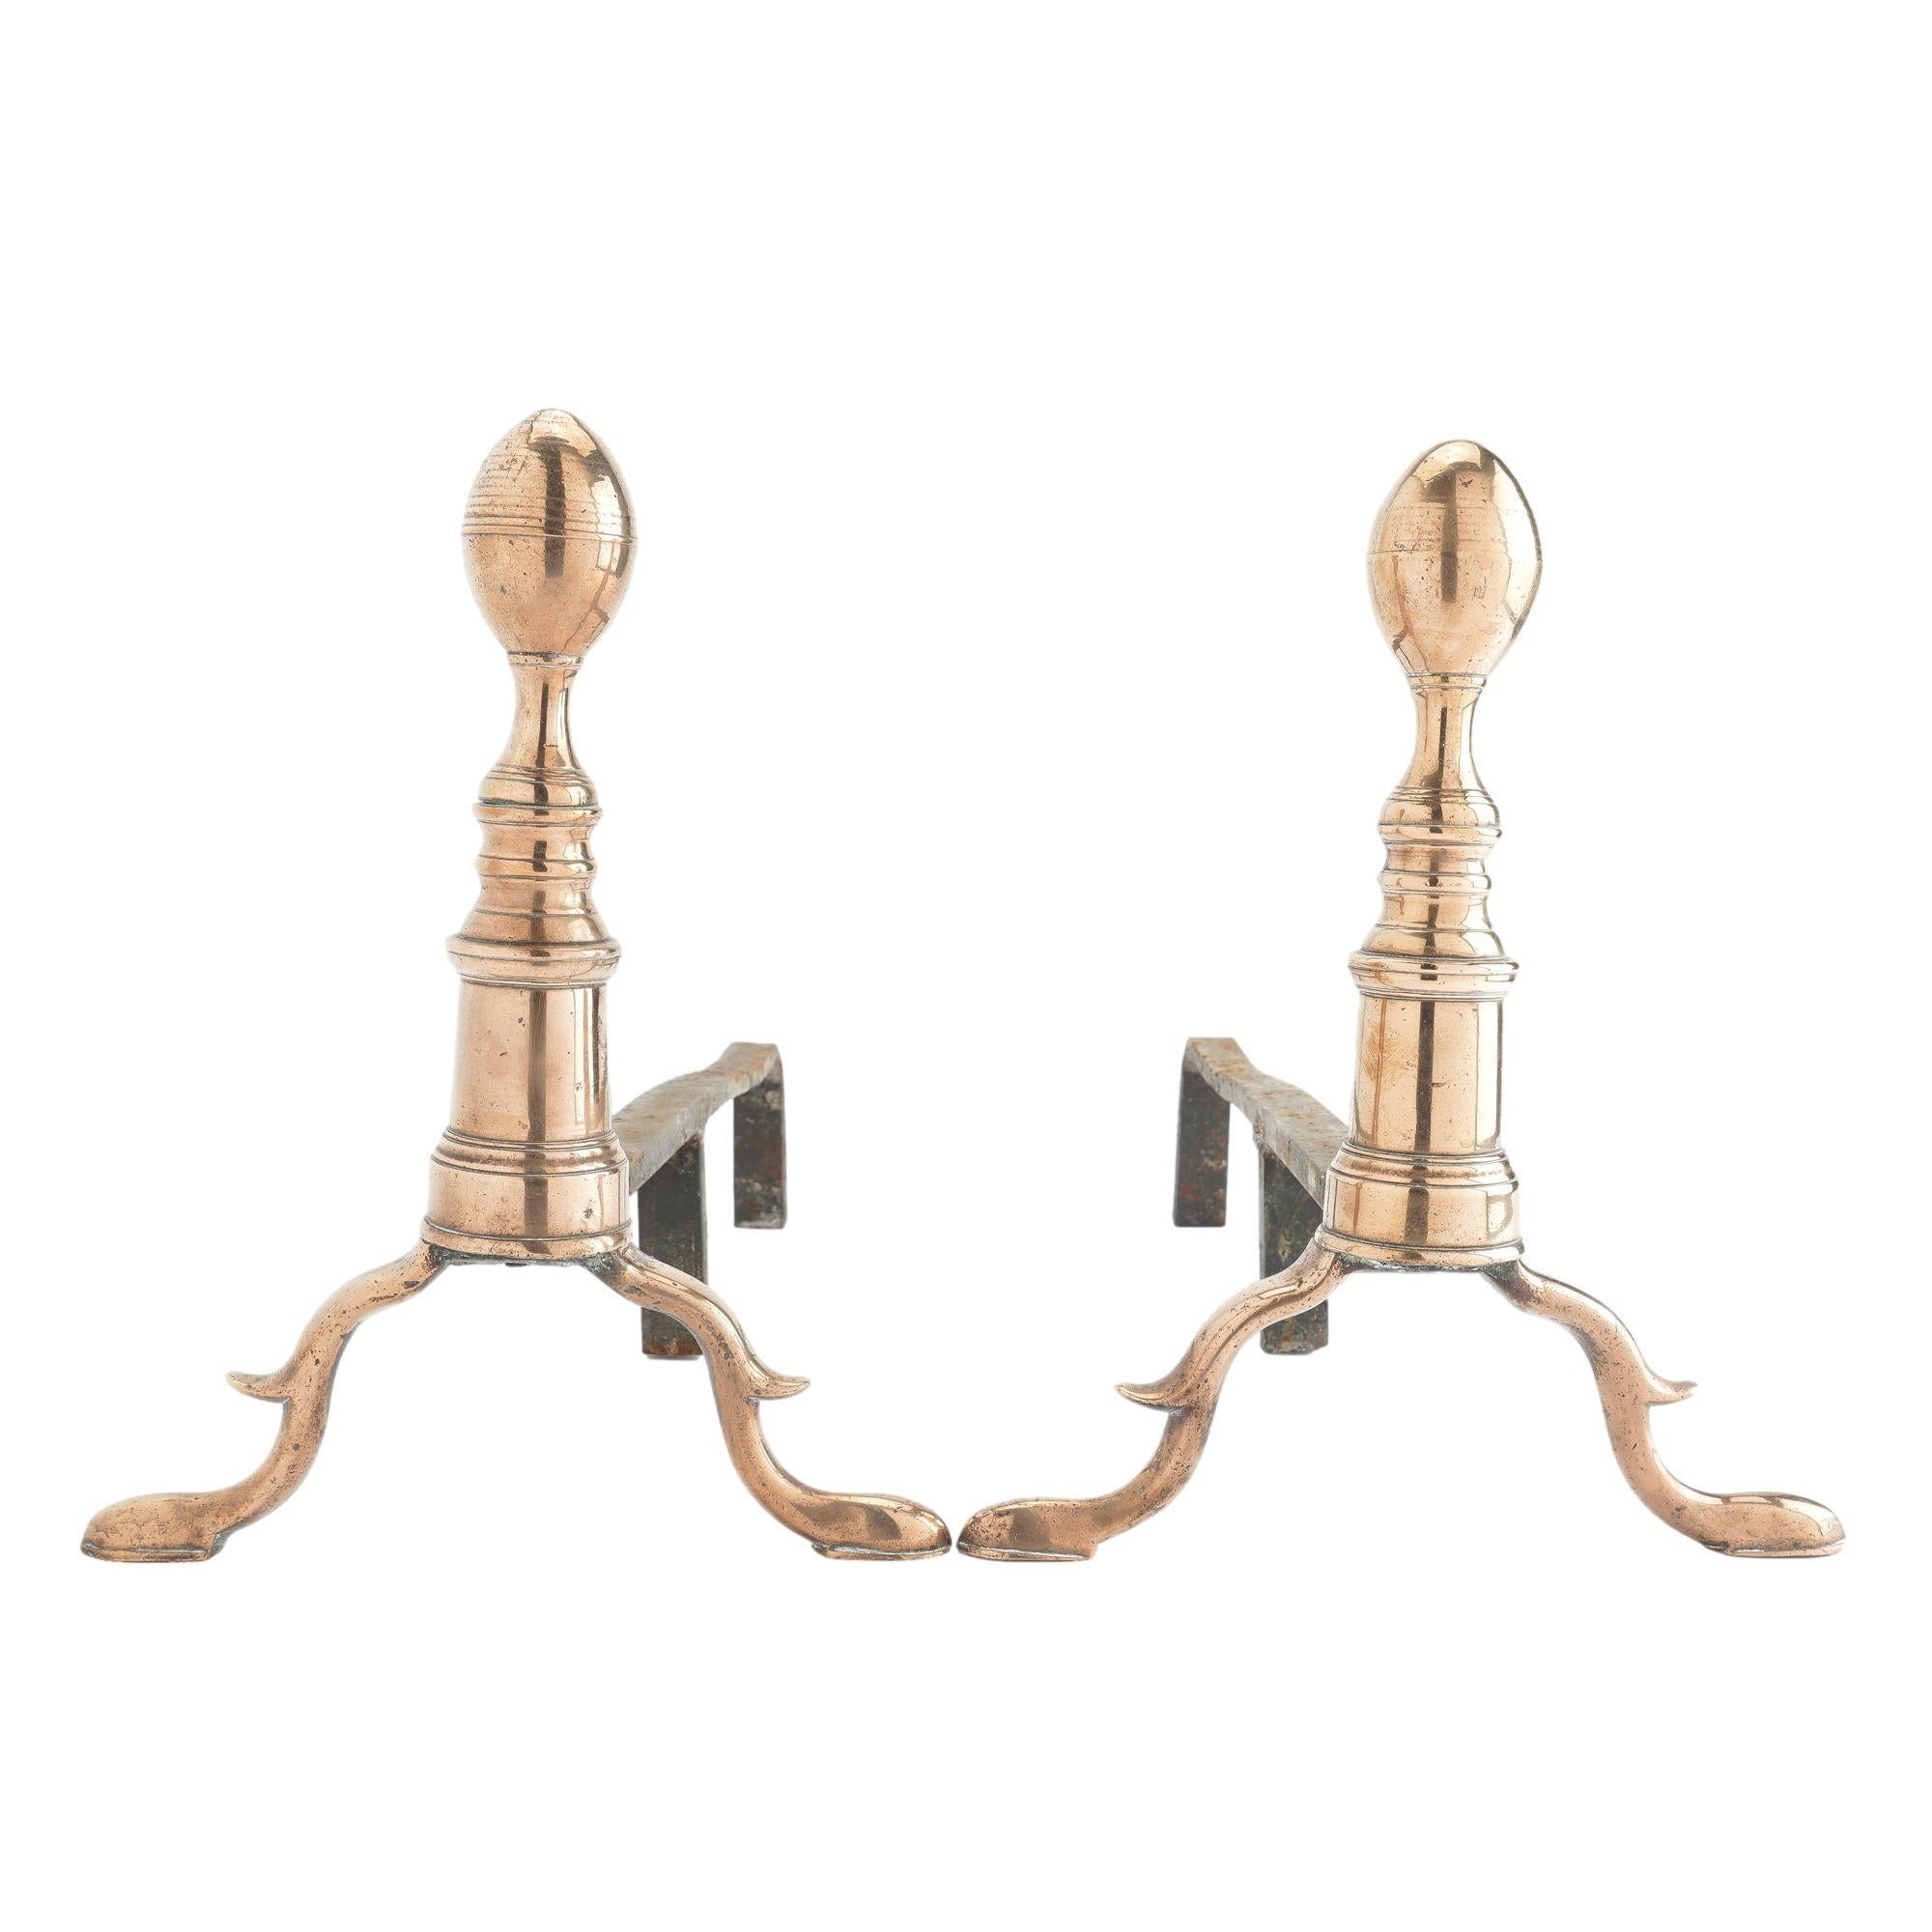 Pair of American cast bell metal brass lemon top andirons. The fire dog balusters are cast in three parts with an oval lemon form finial on waisted pedestal atop a doric column on a square plinth. The arched legs with spurs rest on refined slipper